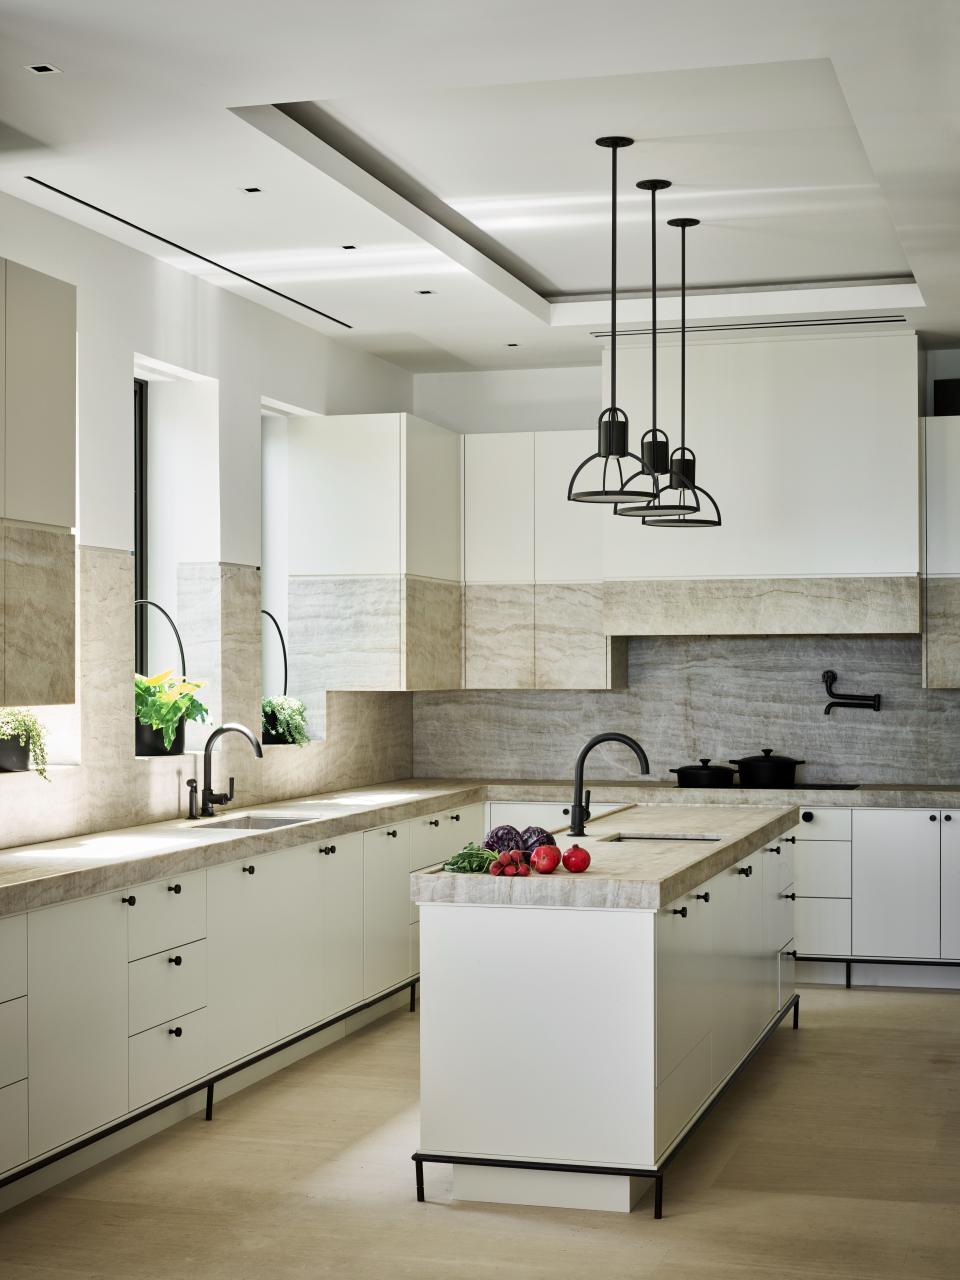 Joyner enlisted his private chef to help design his kitchen to her specifications. Weceselman drew inspiration from French designs for the overall aesthetic. The unique cabinet composition is wood with stone inserts and were custom created by Wecselman Design. The pendants over the island are by Holly Hunt.